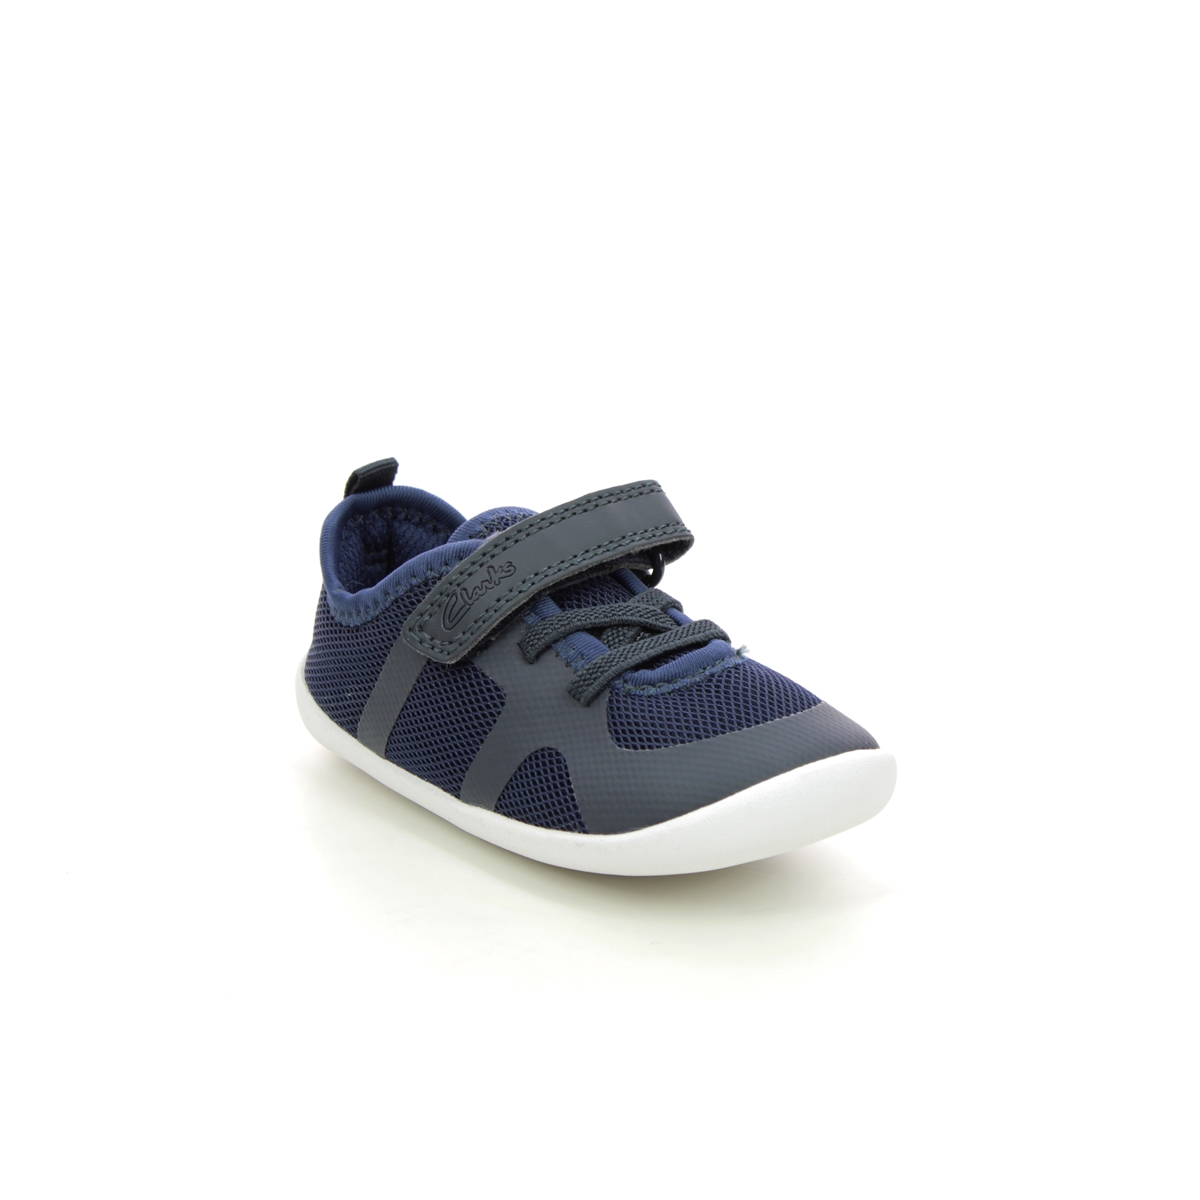 Clarks Roamer Flux T Navy Kids Boys First Shoes 6510-77G in a Plain Textile in Size 3.5